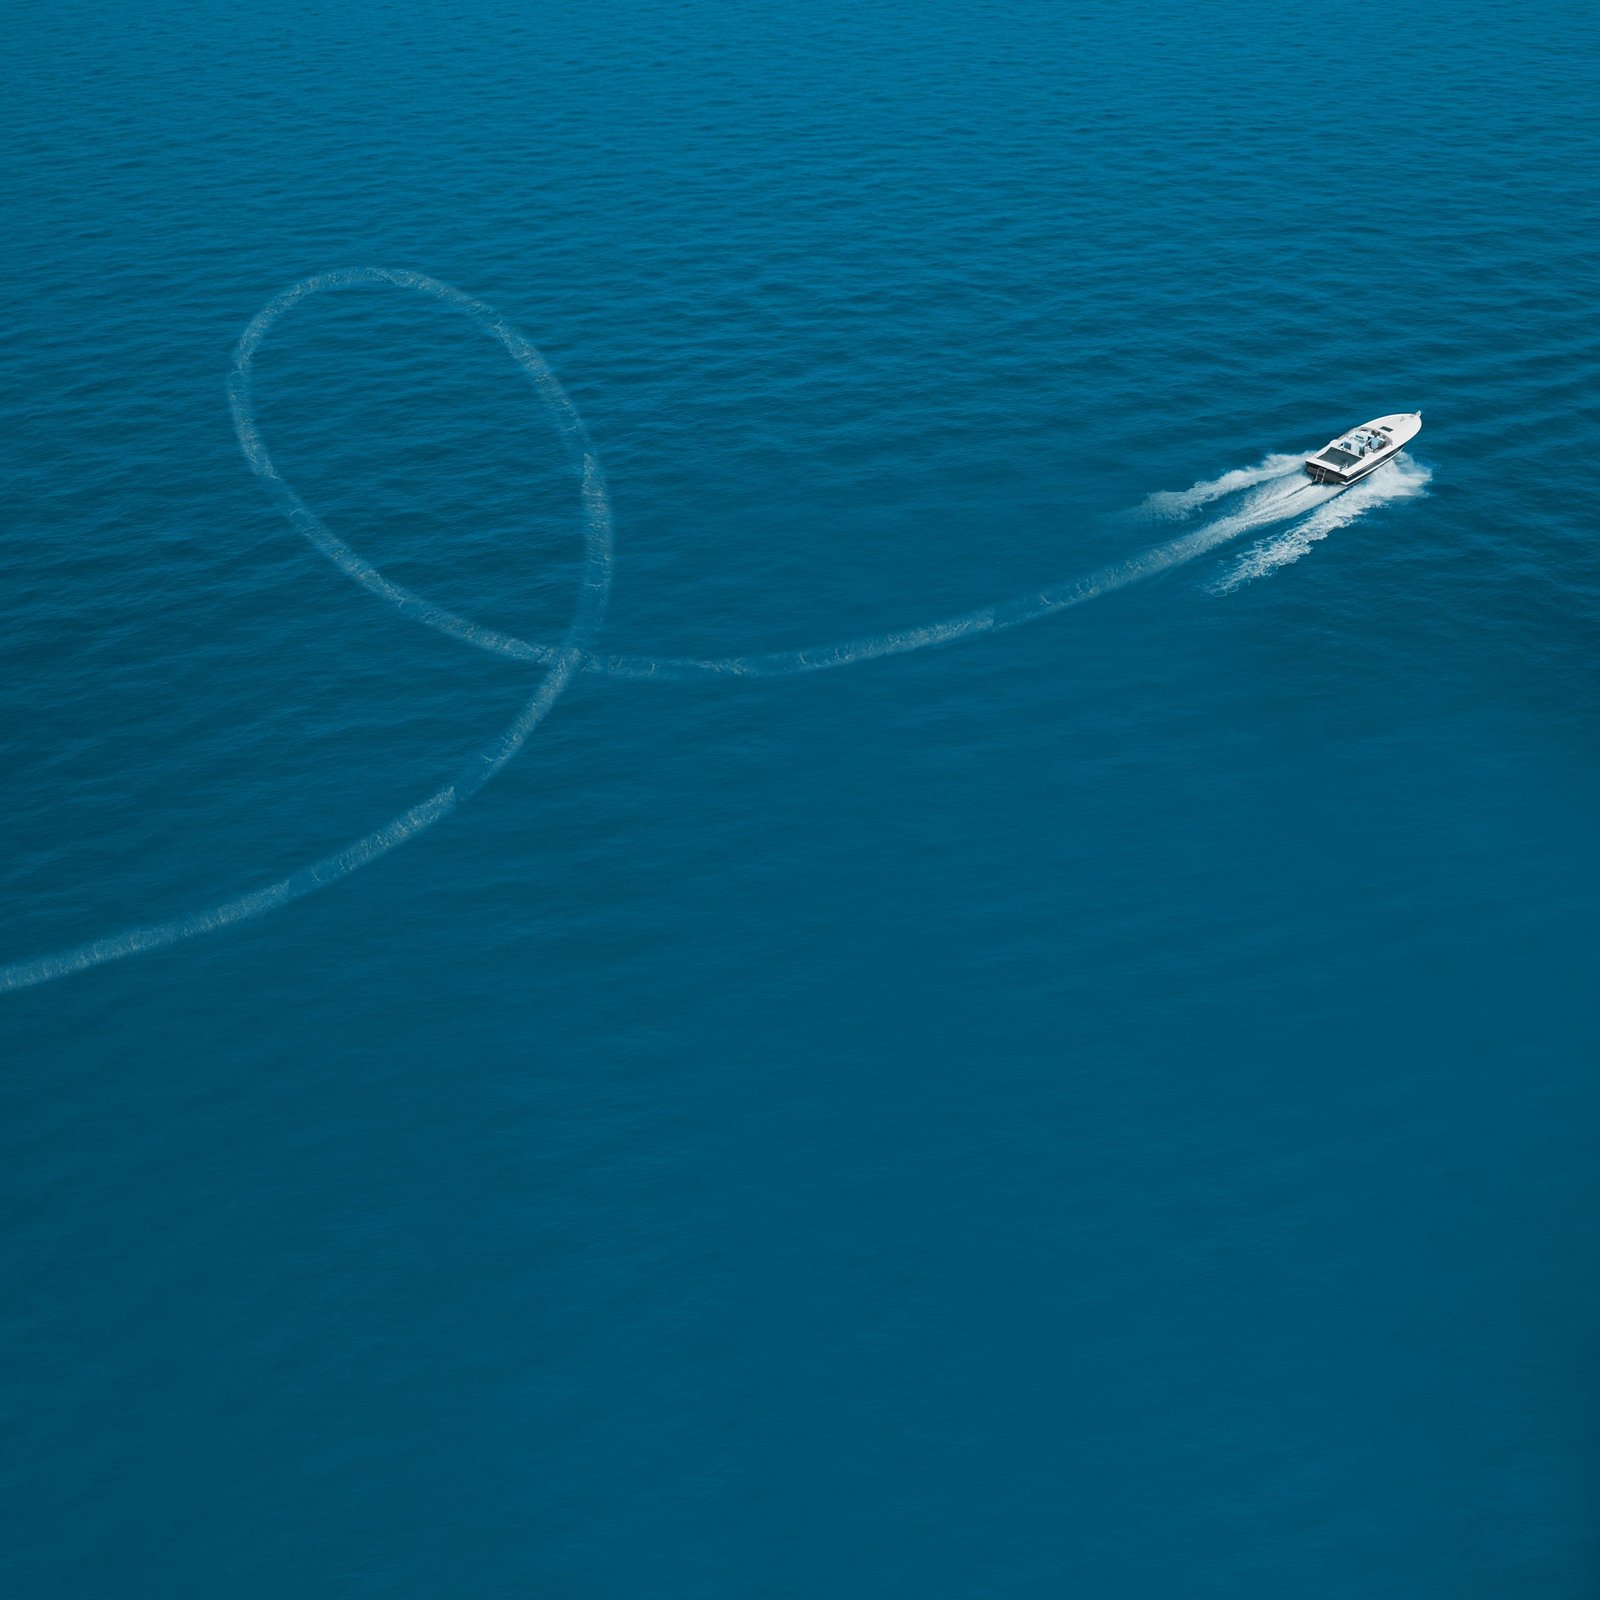 Aerial view luxury motor boat. Drone view of a boat  the blue clear waters. Travel - image. Large speed boat moving at high speed side view.